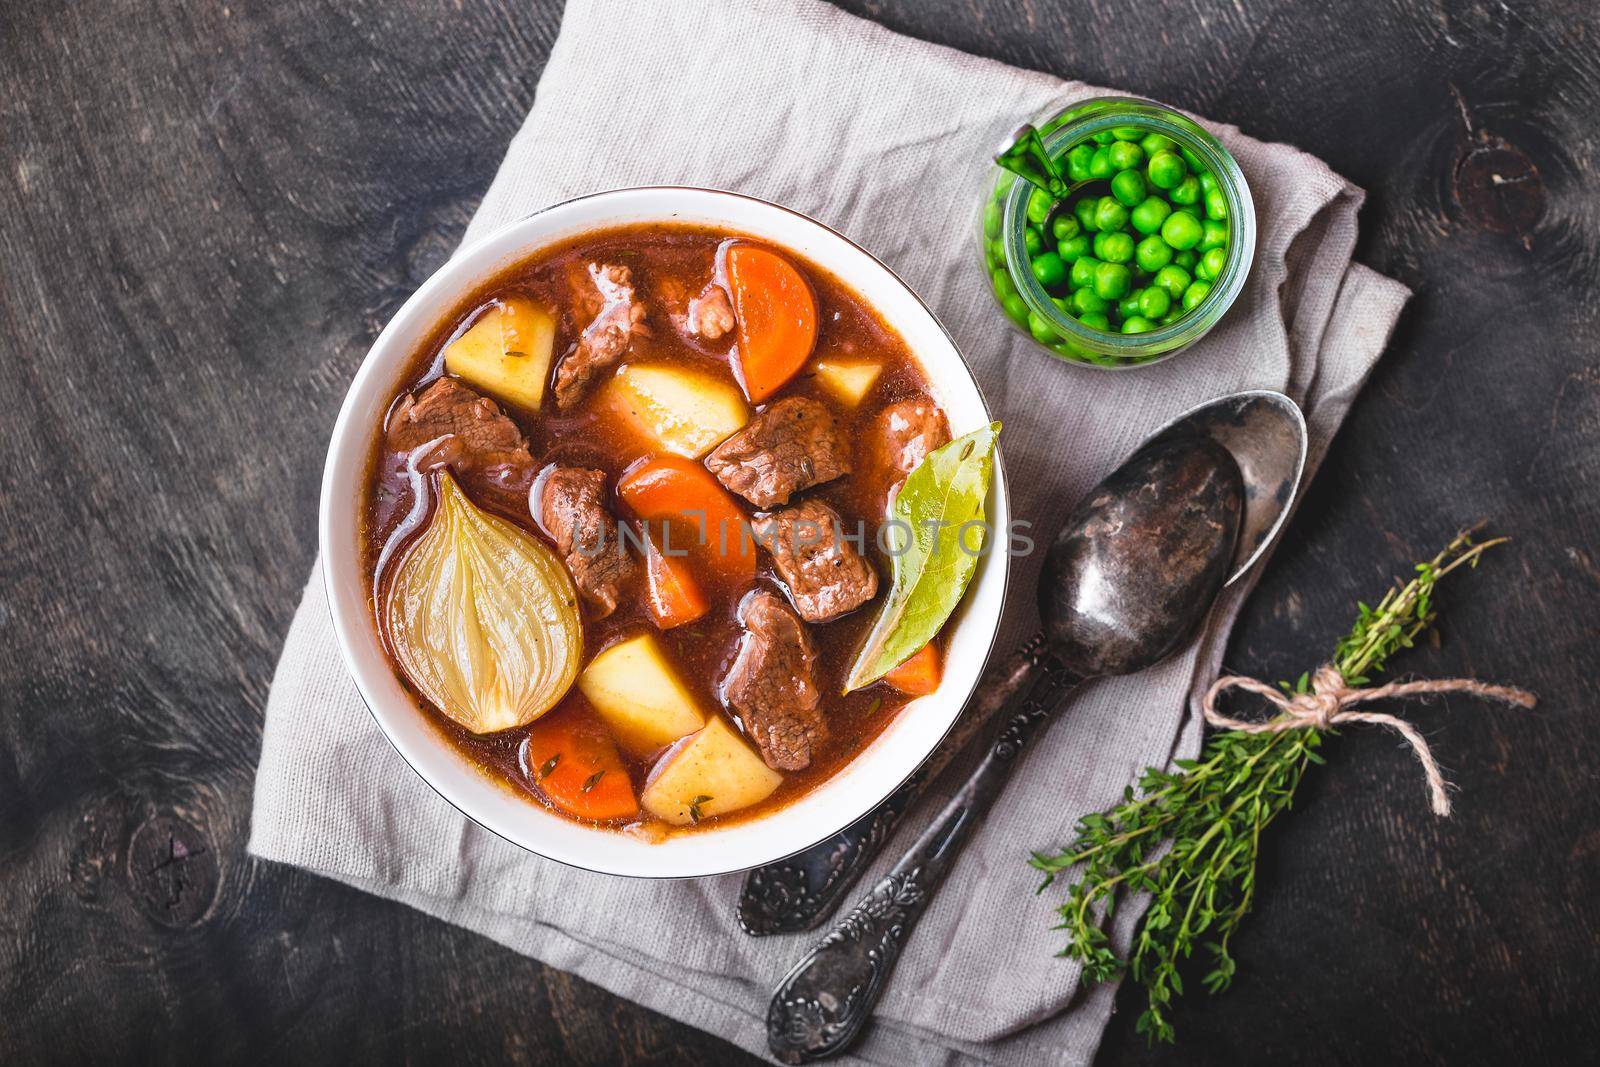 Meat stew with beef, potato, carrot, onion, spices, green peas. Slow cooked meat stew, bowl, wooden background. Hot autumn/winter dish. Closeup. Top view. Comfort food. Homemade soup/ragout/casserole